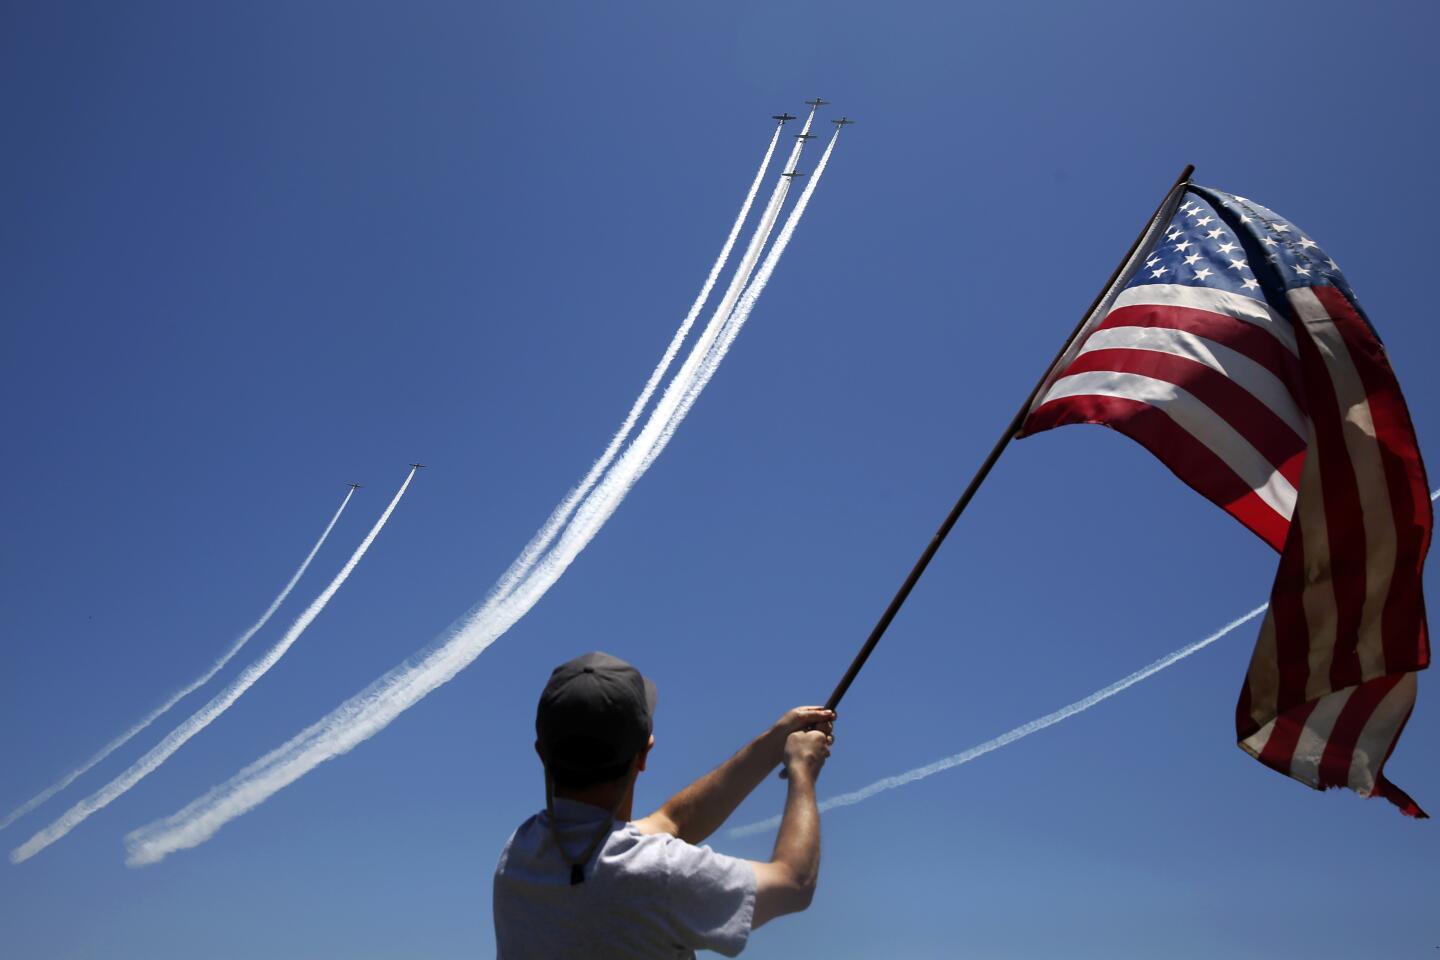 Michael Gentile waves a flag as warbirds fly over the Queen Mary on Monday in Long Beach.